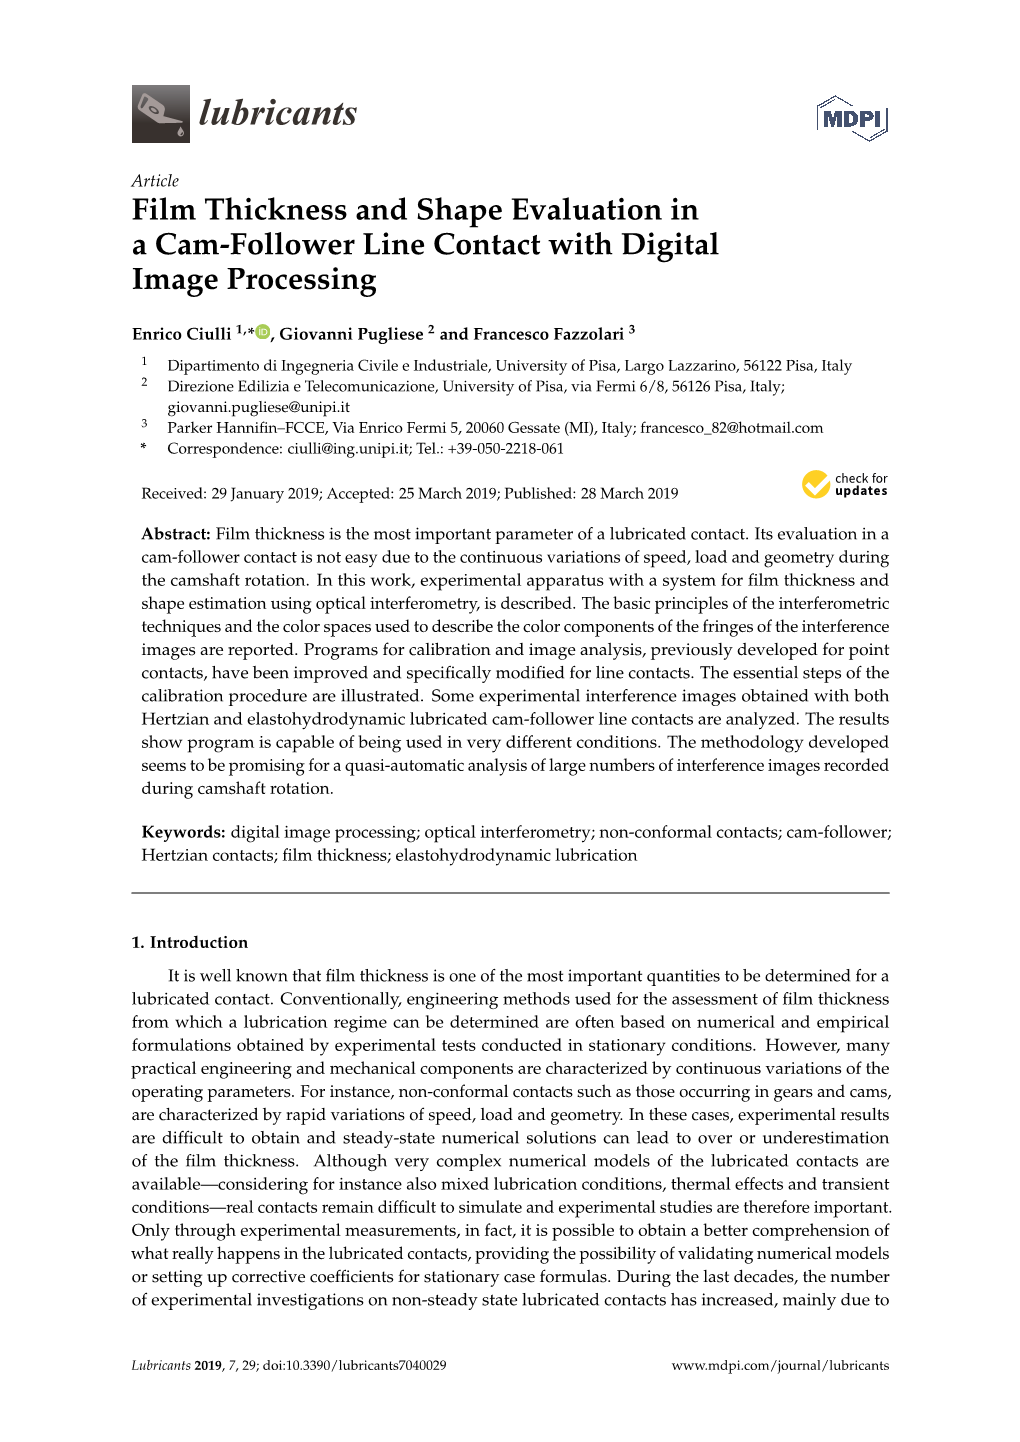 Film Thickness and Shape Evaluation in a Cam-Follower Line Contact with Digital Image Processing